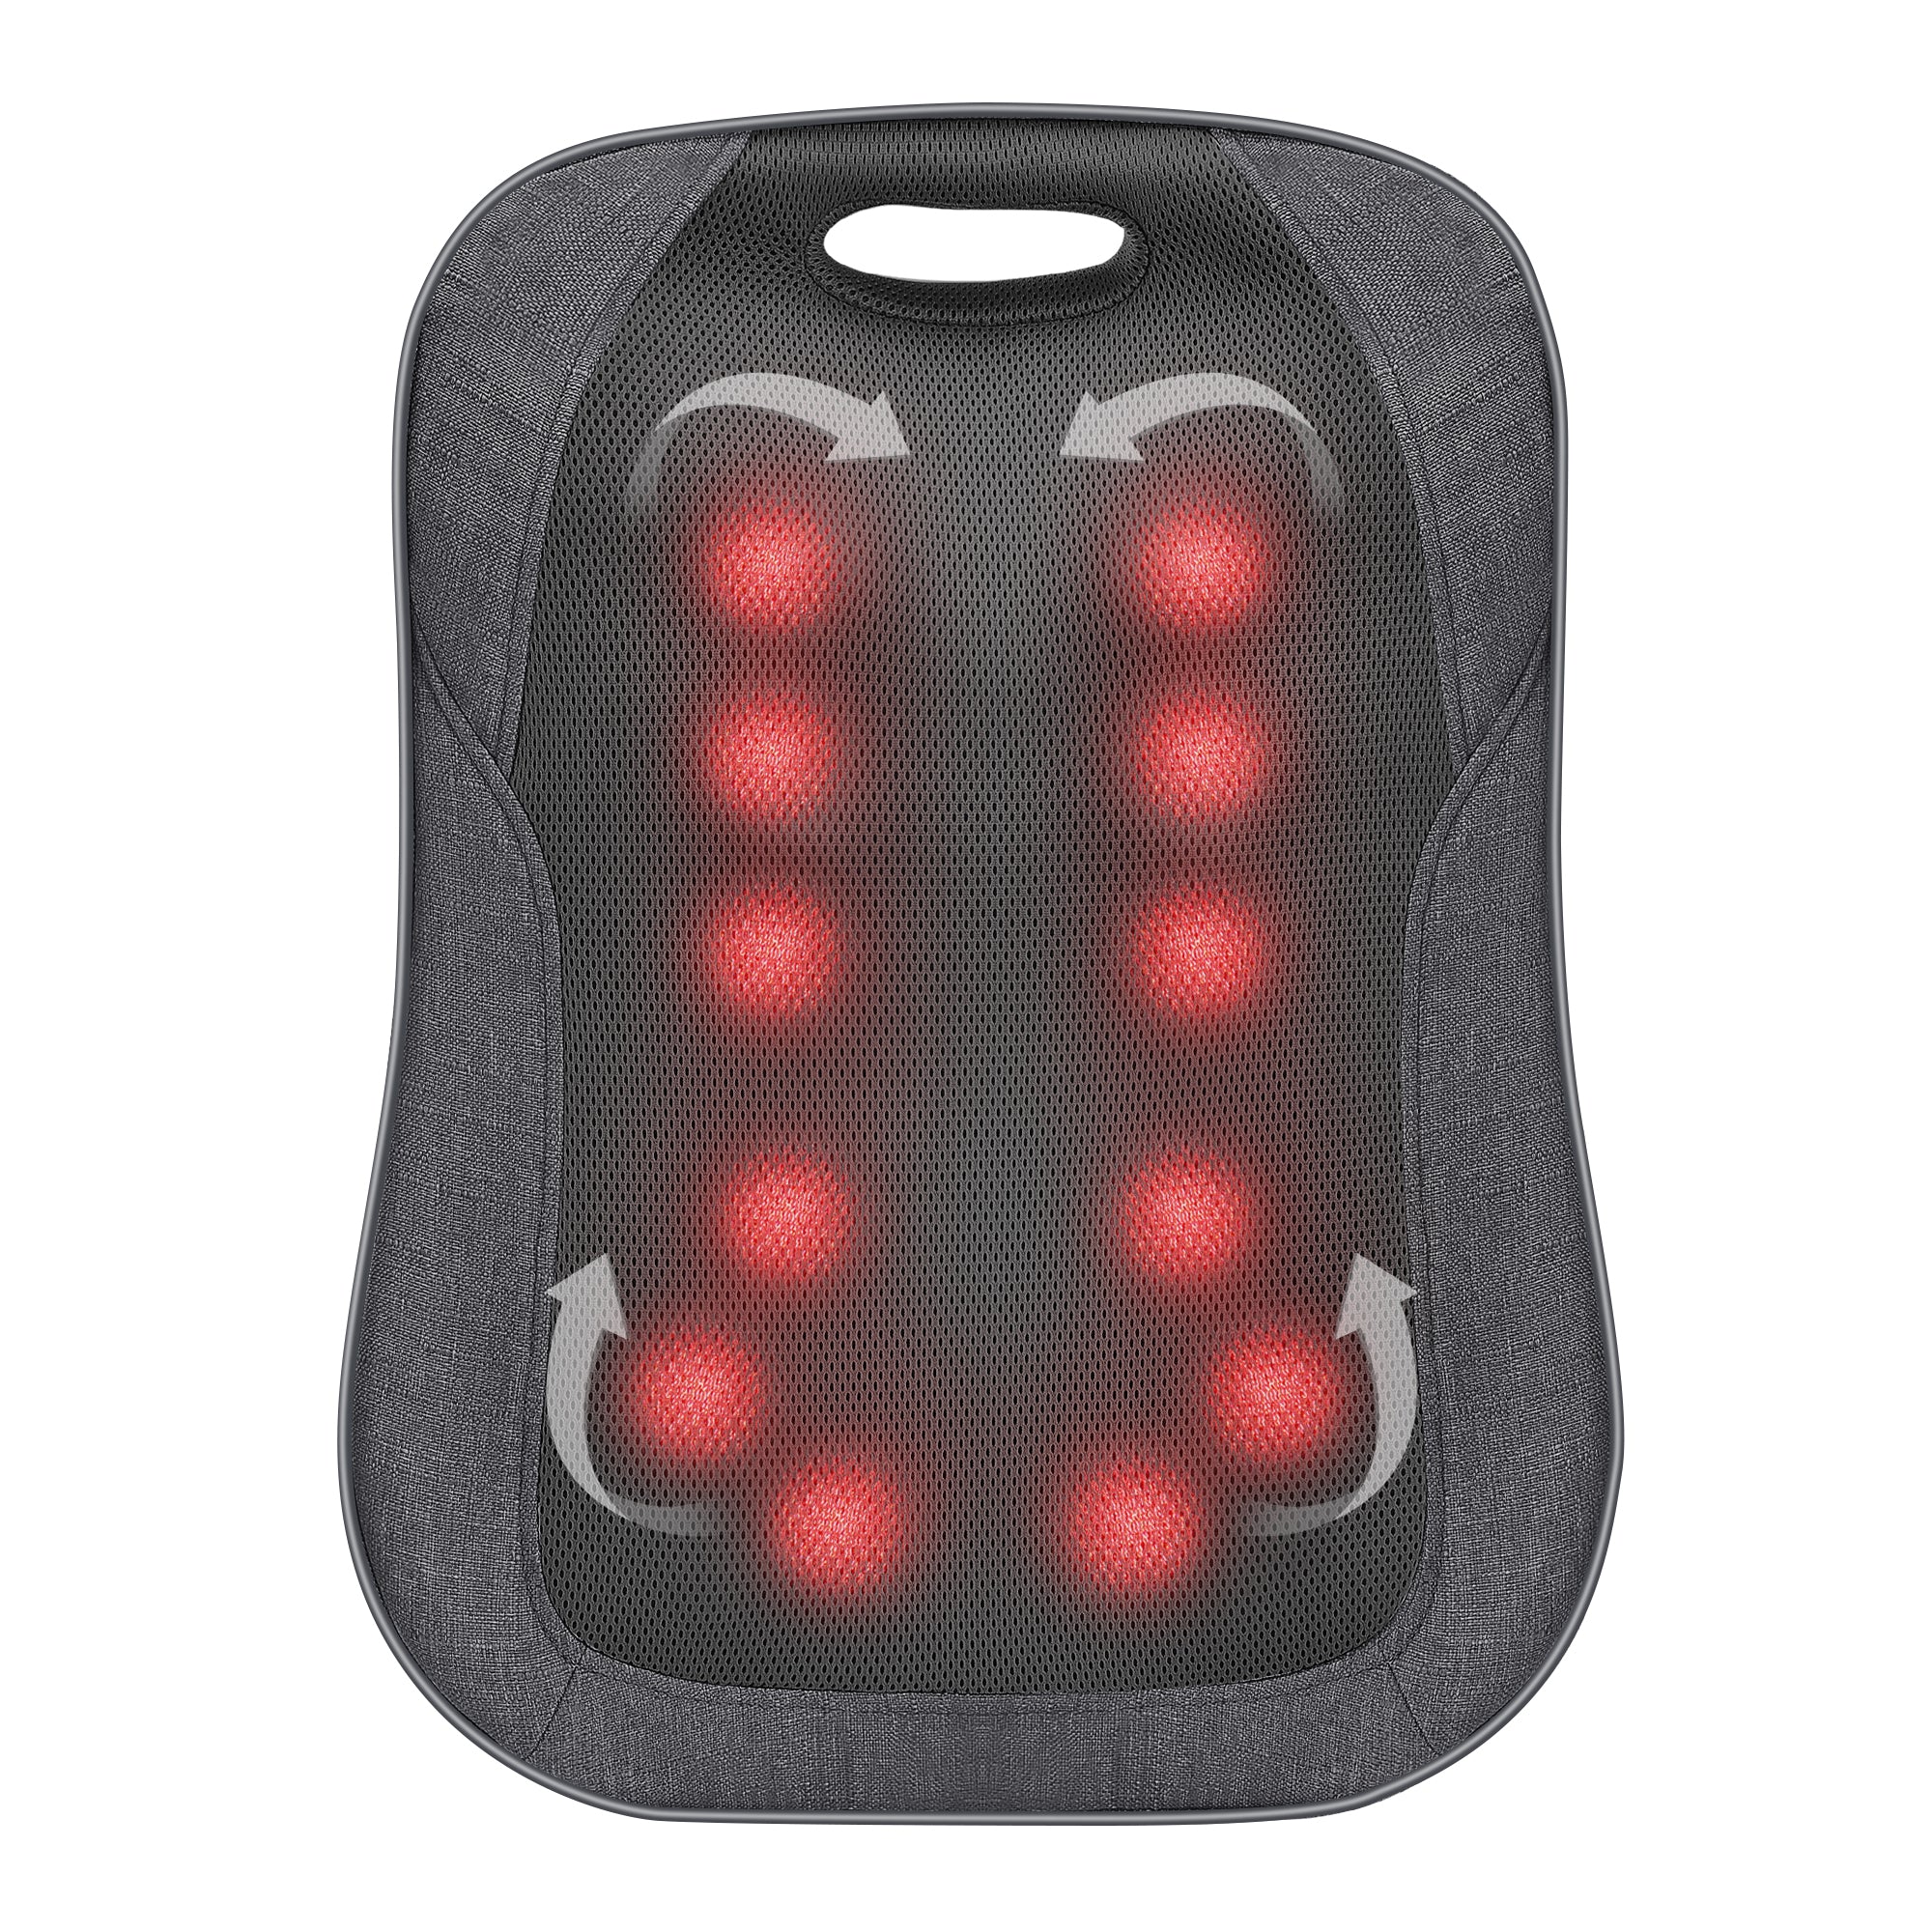 comrelax Back Massage Chair Pad, Deep Tissue Vibration Seat Massage  Cushion, 2 Levels Cooling or Hea…See more comrelax Back Massage Chair Pad,  Deep